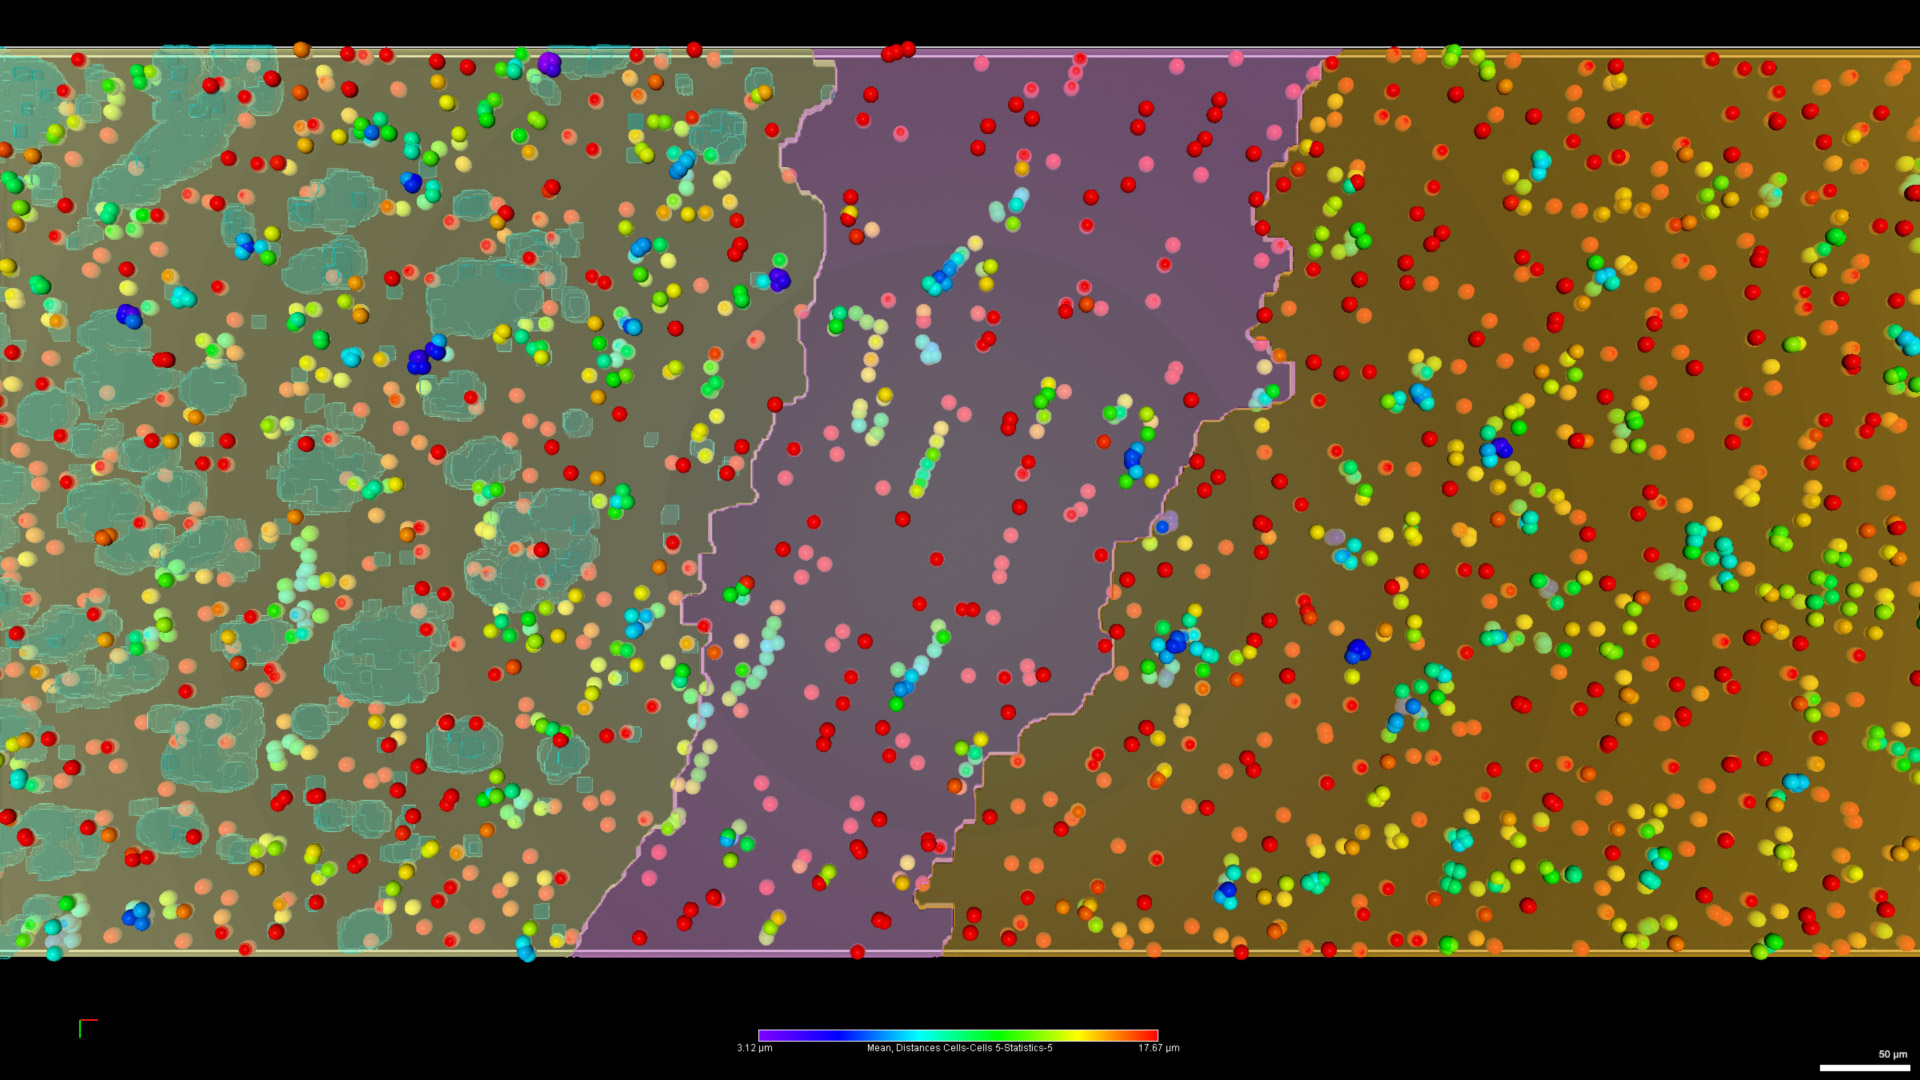 Figure 25: Cell density overlaid with brain regions. Digital reconstruction of the cell bodies represented as objects, color-coded by their distance to their five closest neighbors